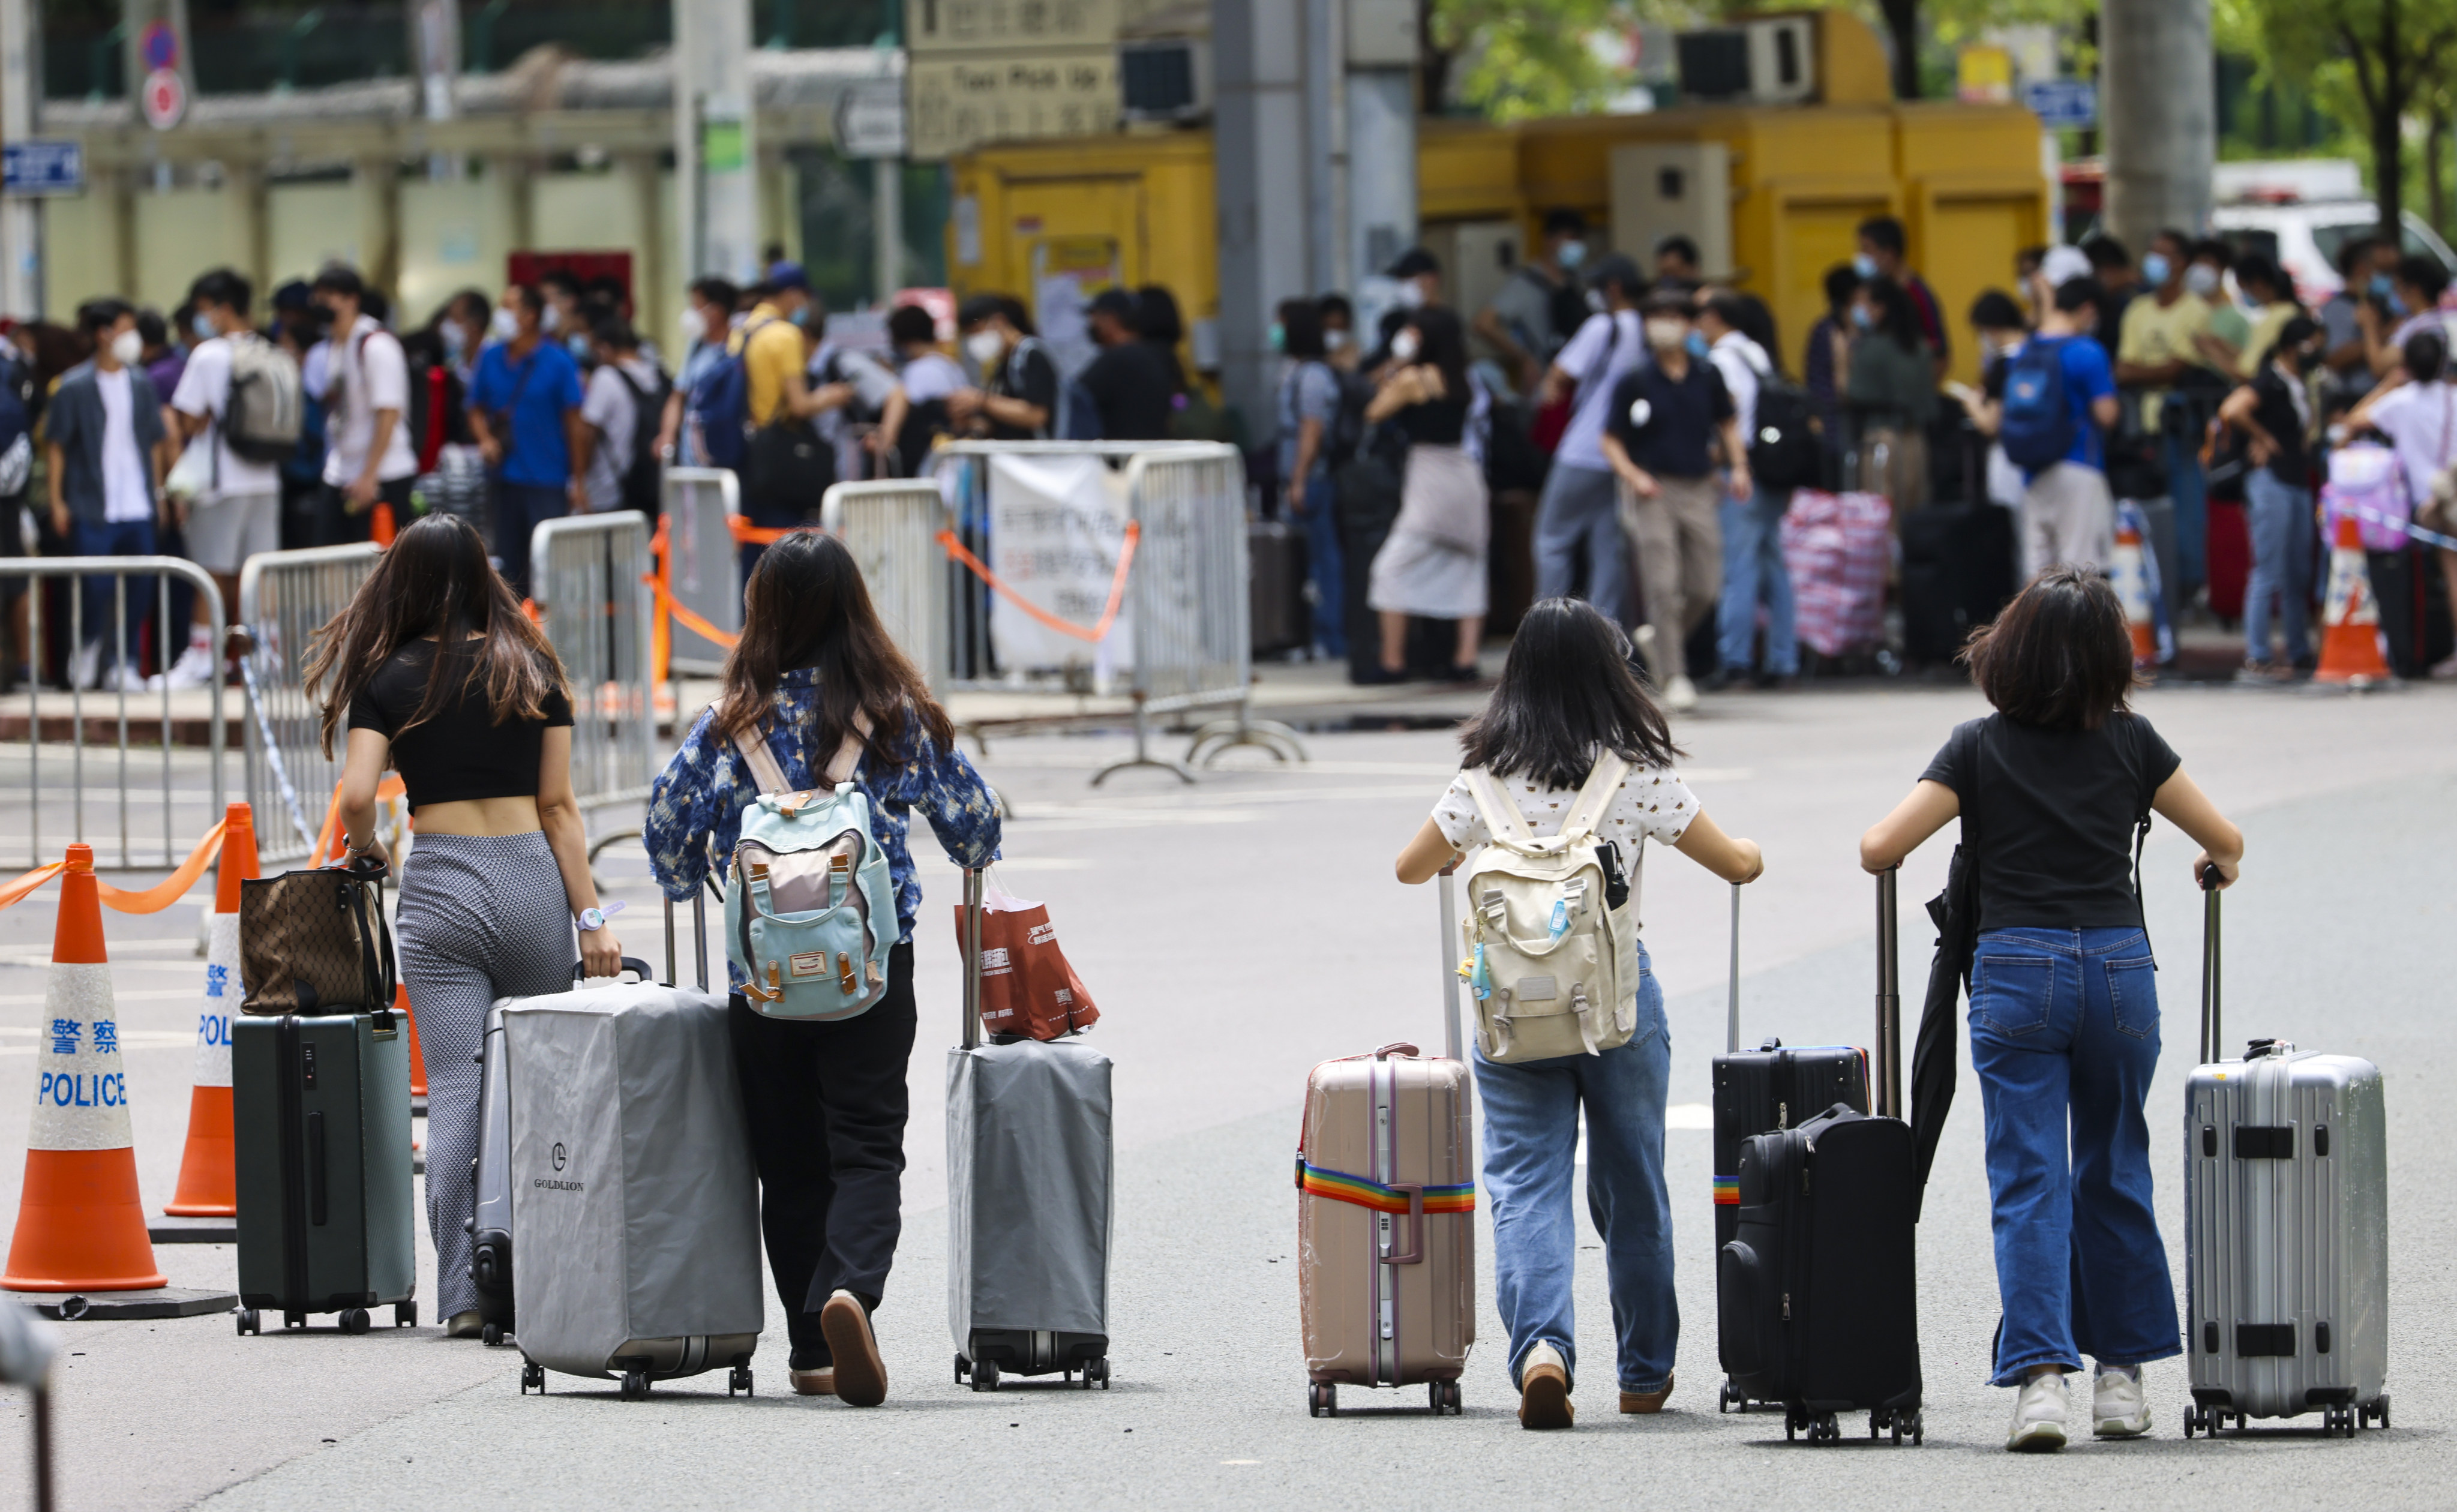 Hong Kong’s Consumer Council tested 15 suitcase samples for carcinogenic chemicals. Photo: Dickson Lee